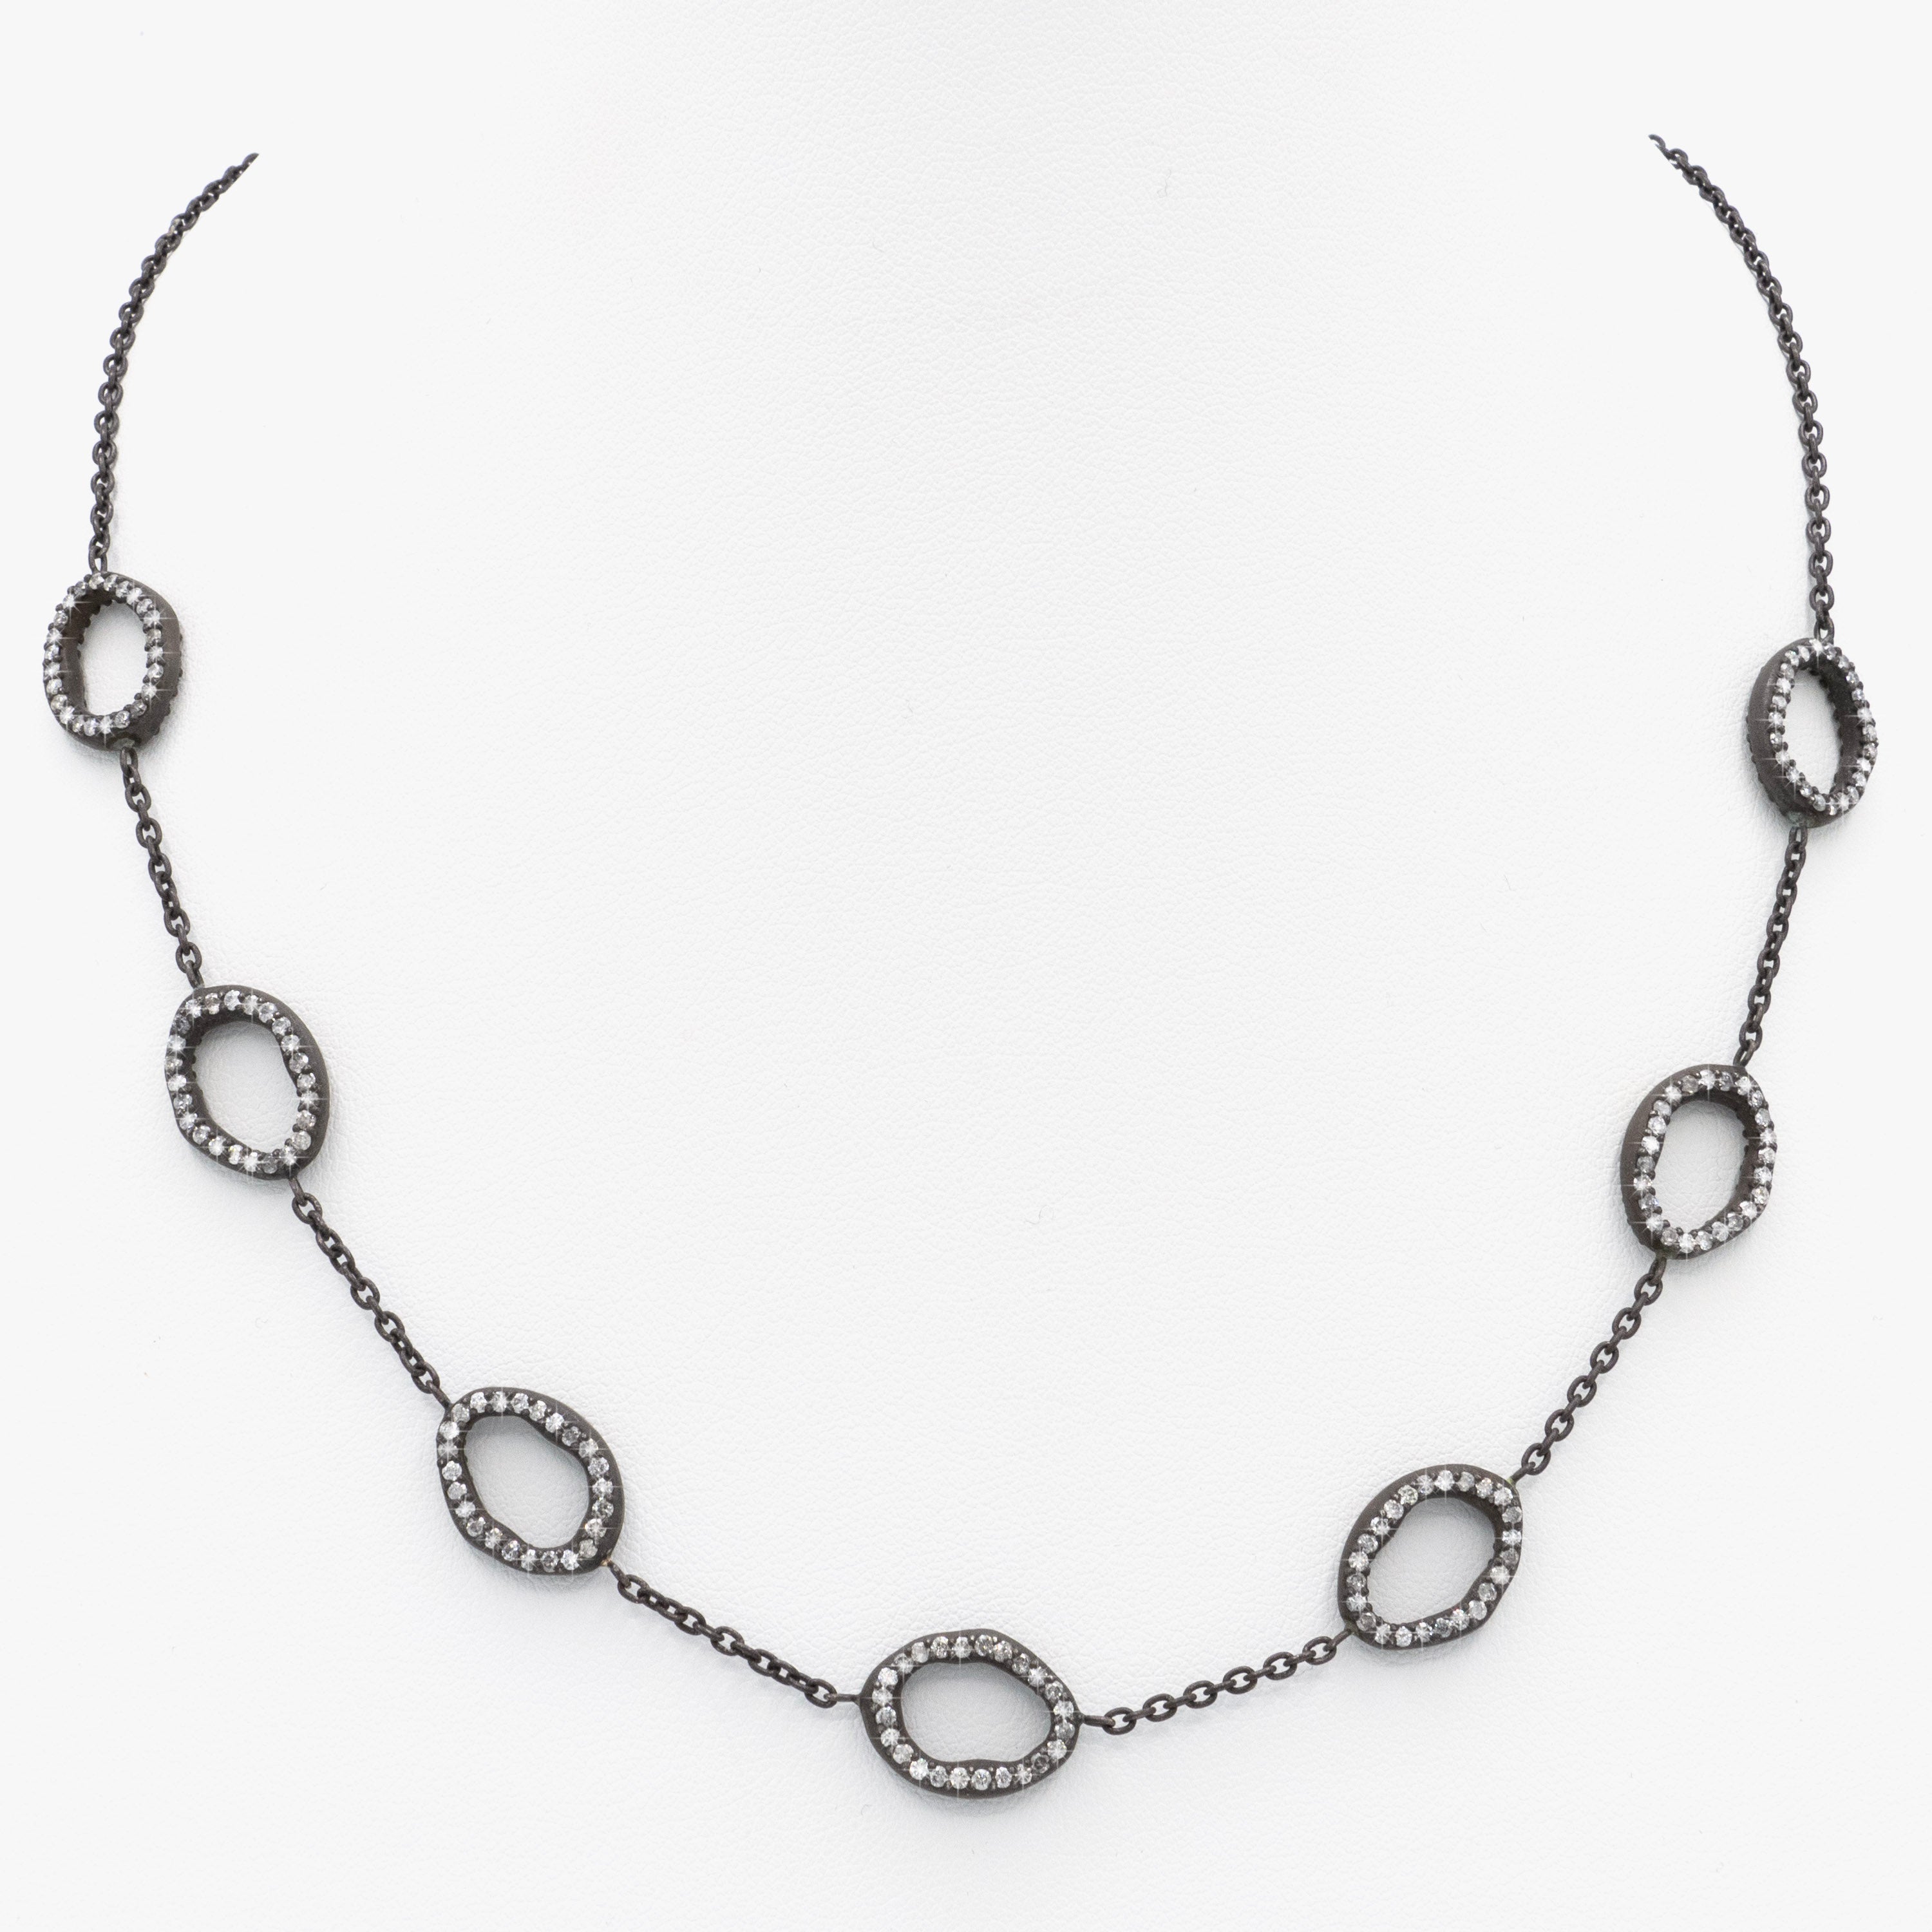 Irit Design 7 Sterling Silver Hoops with Diamonds Drop Necklace